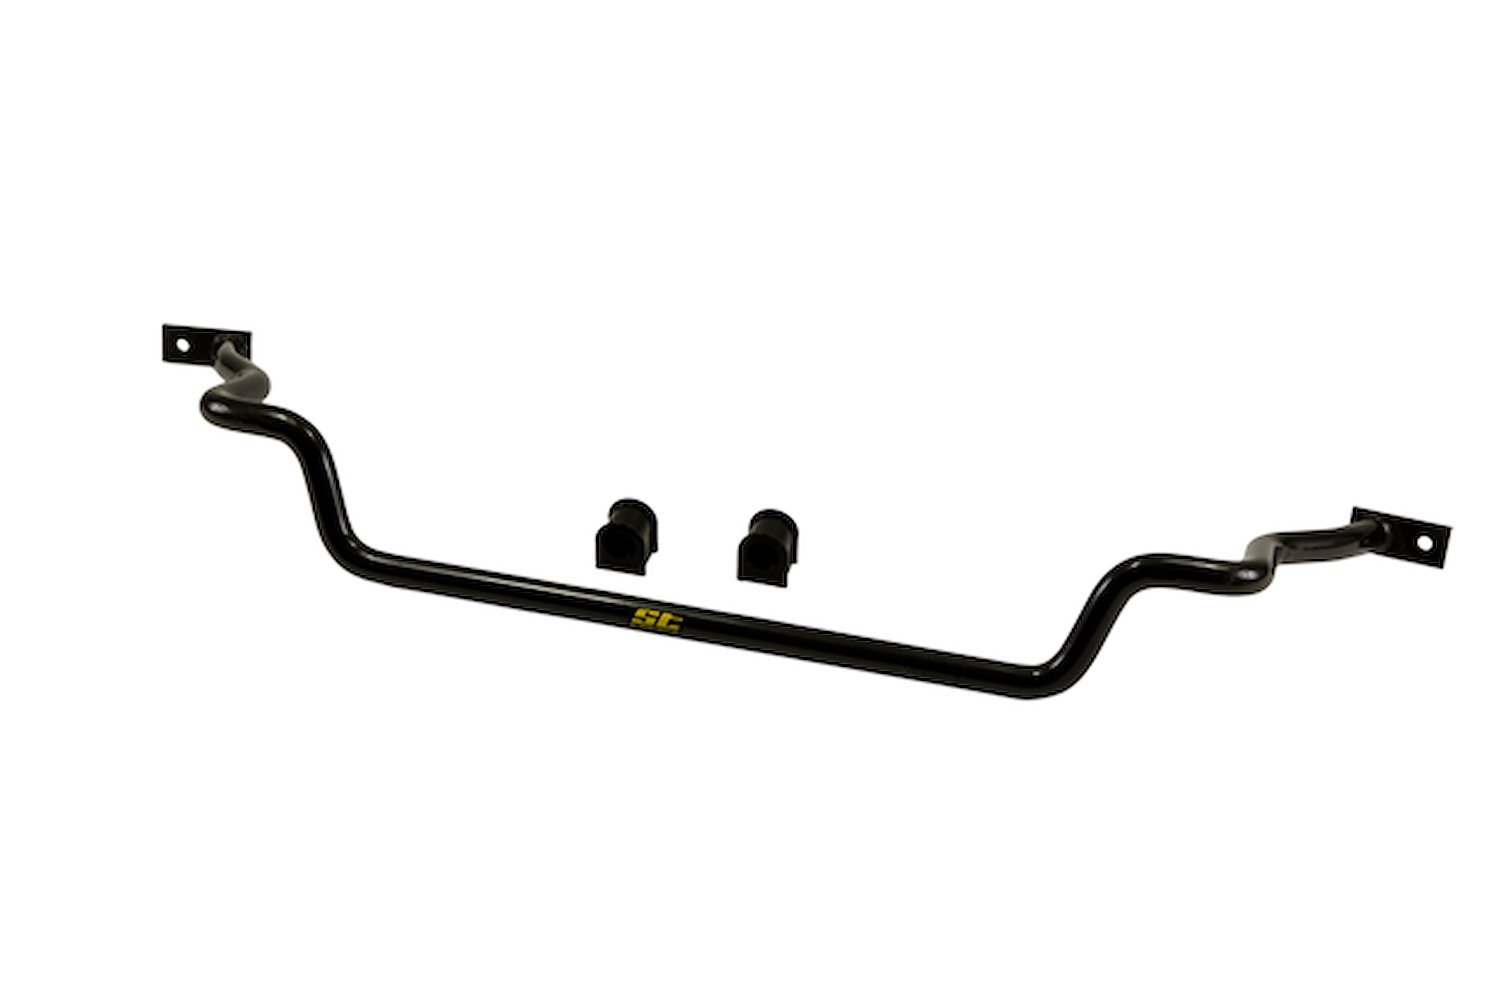 50215 Anti-Swaybar - Front for 86-92 Toyota Supra incl. Turbo